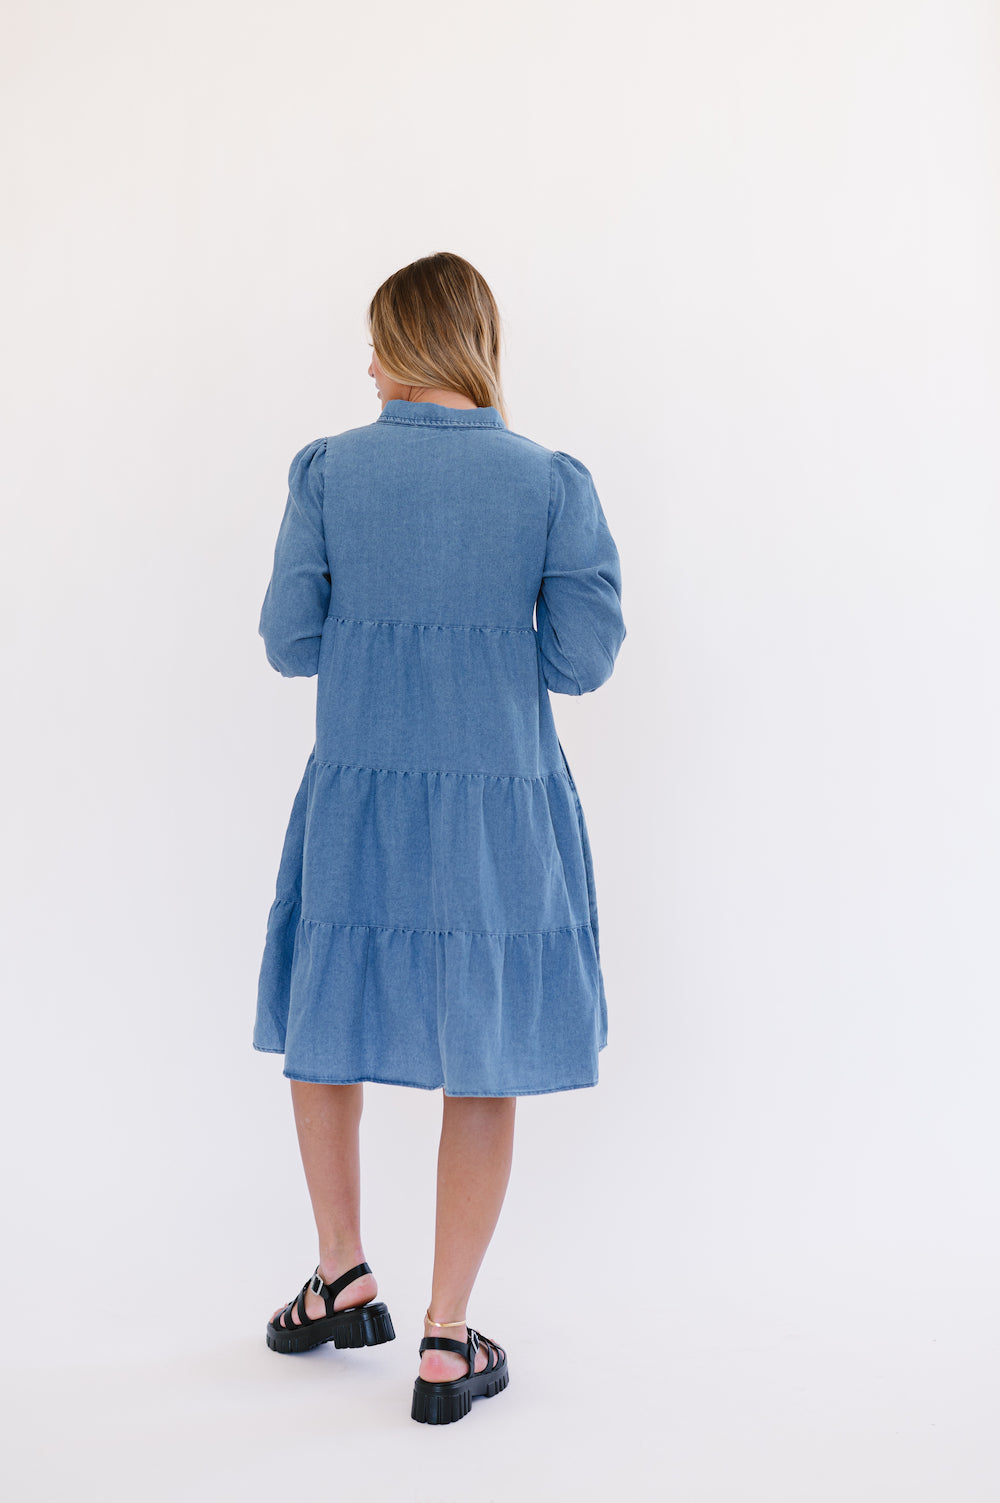 Tiered denim dress with quarter length sleeves